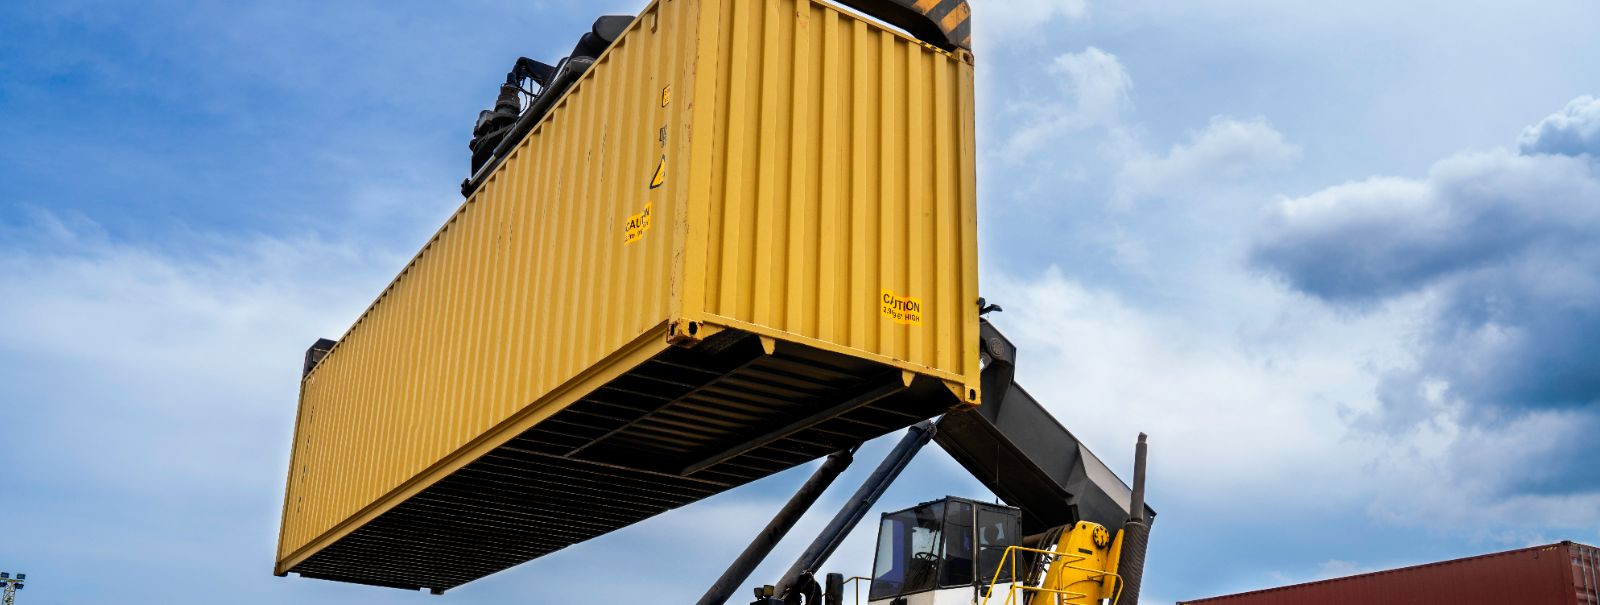 Multilift box systems are innovative solutions designed to streamline the transportation and storage of materials on construction sites. These modular units can